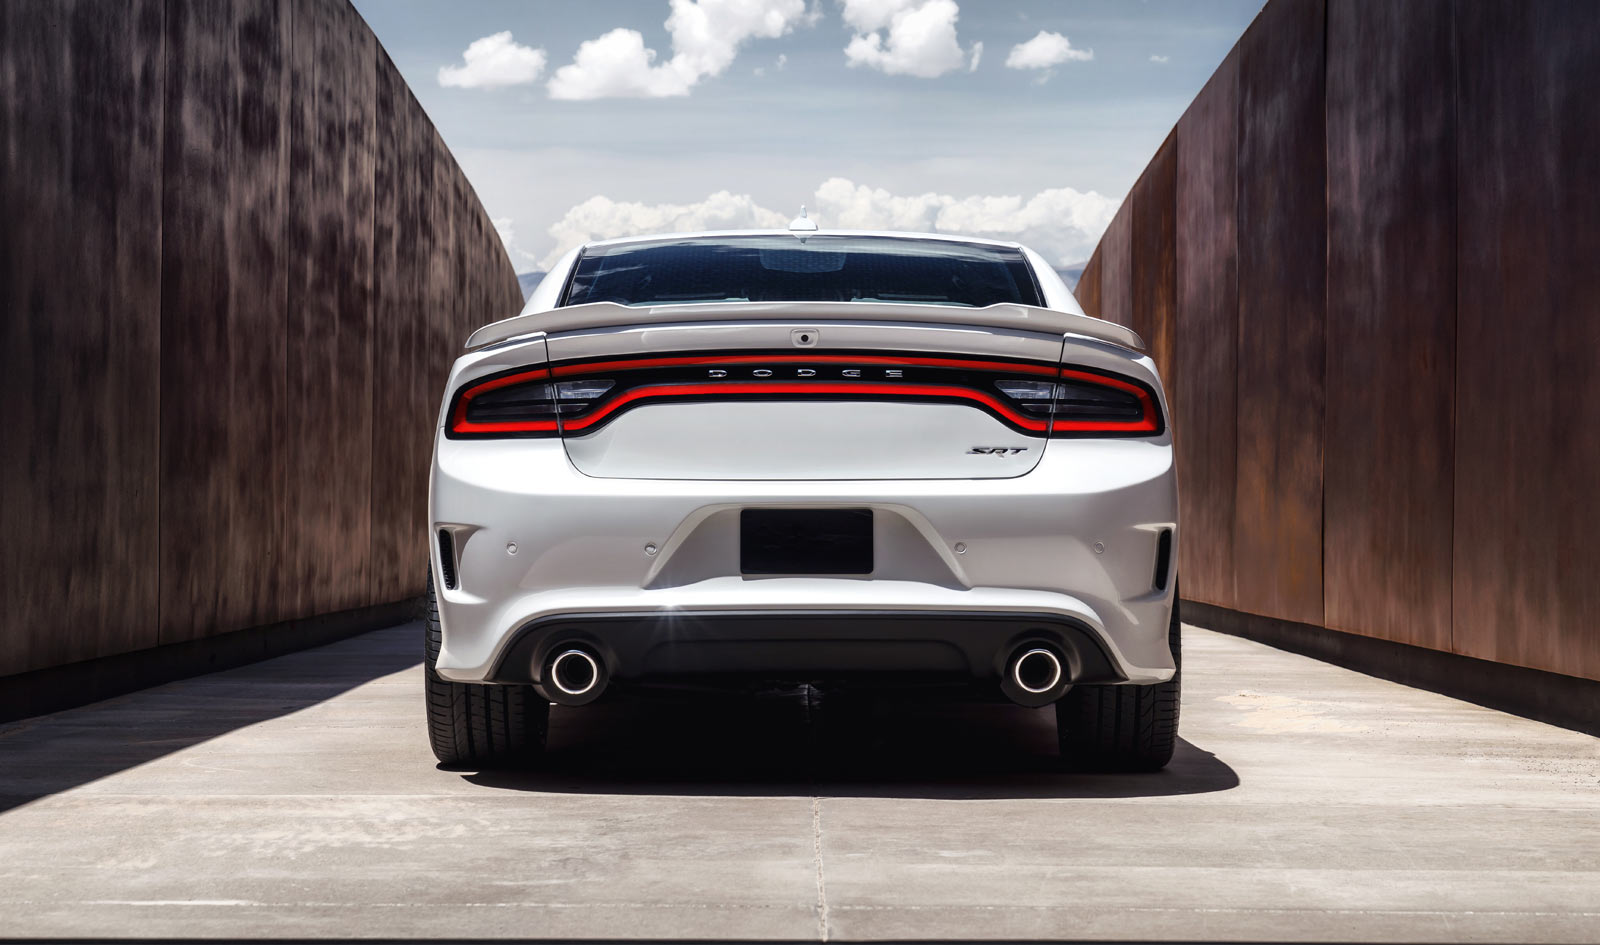 2015 Dodge Charger Pics, Vehicles Collection